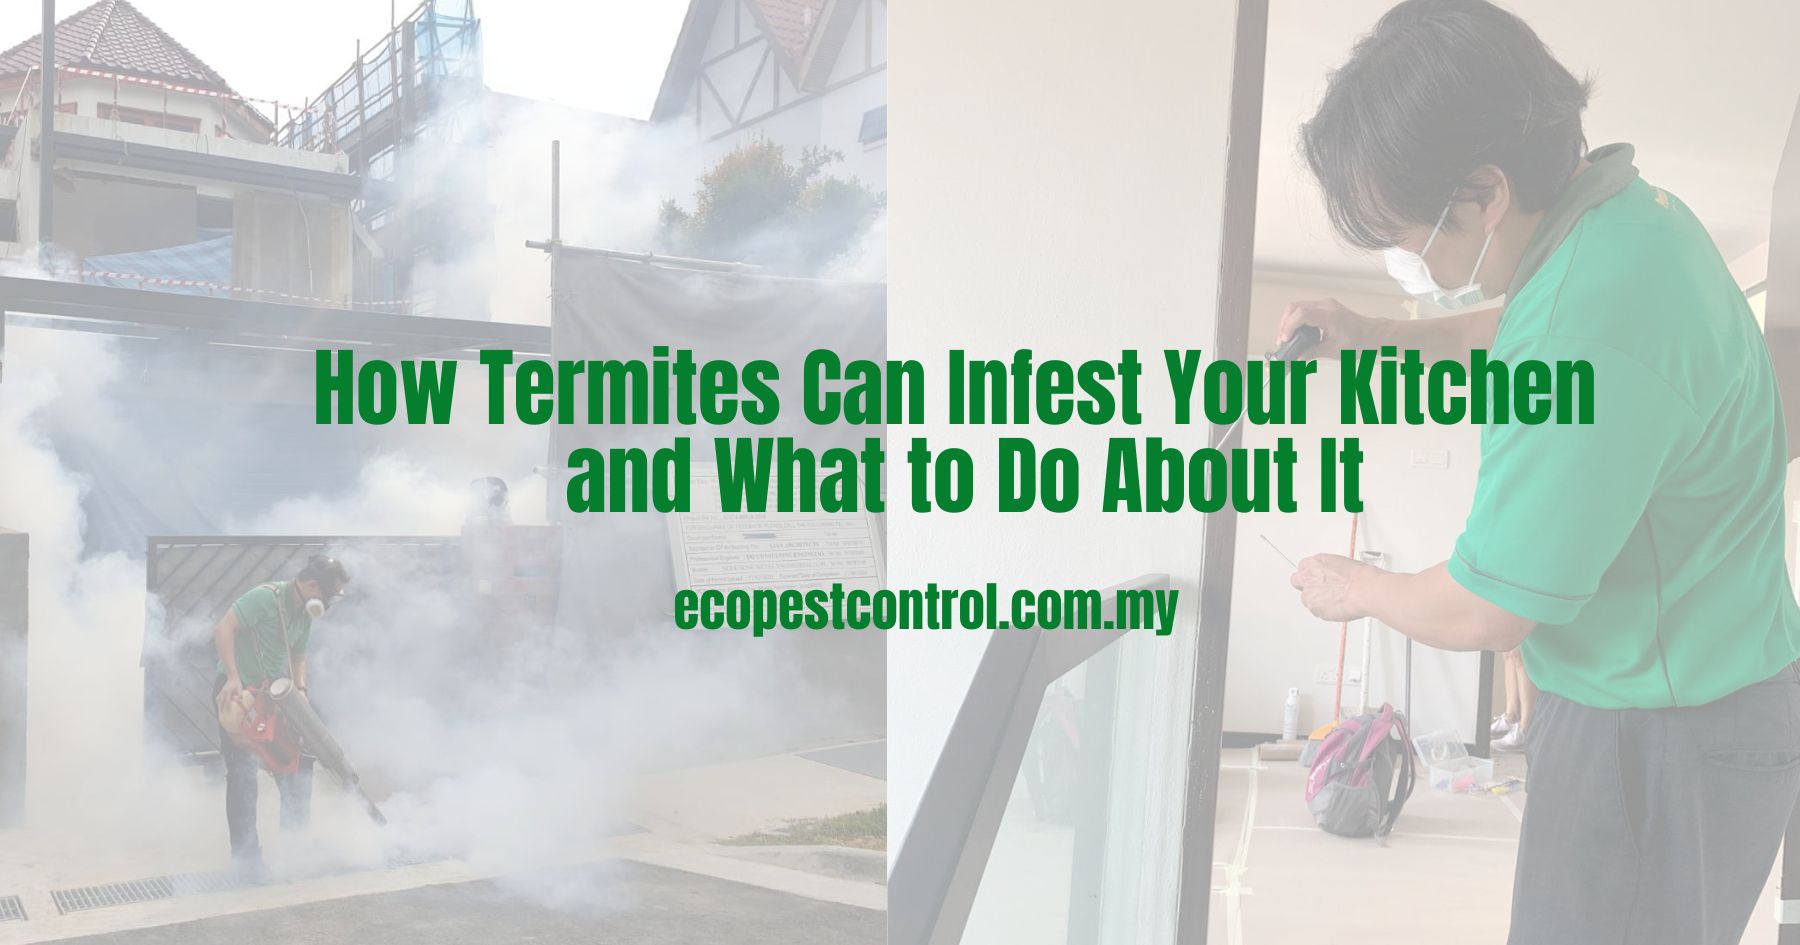 How Termites Can Infest Your Kitchen